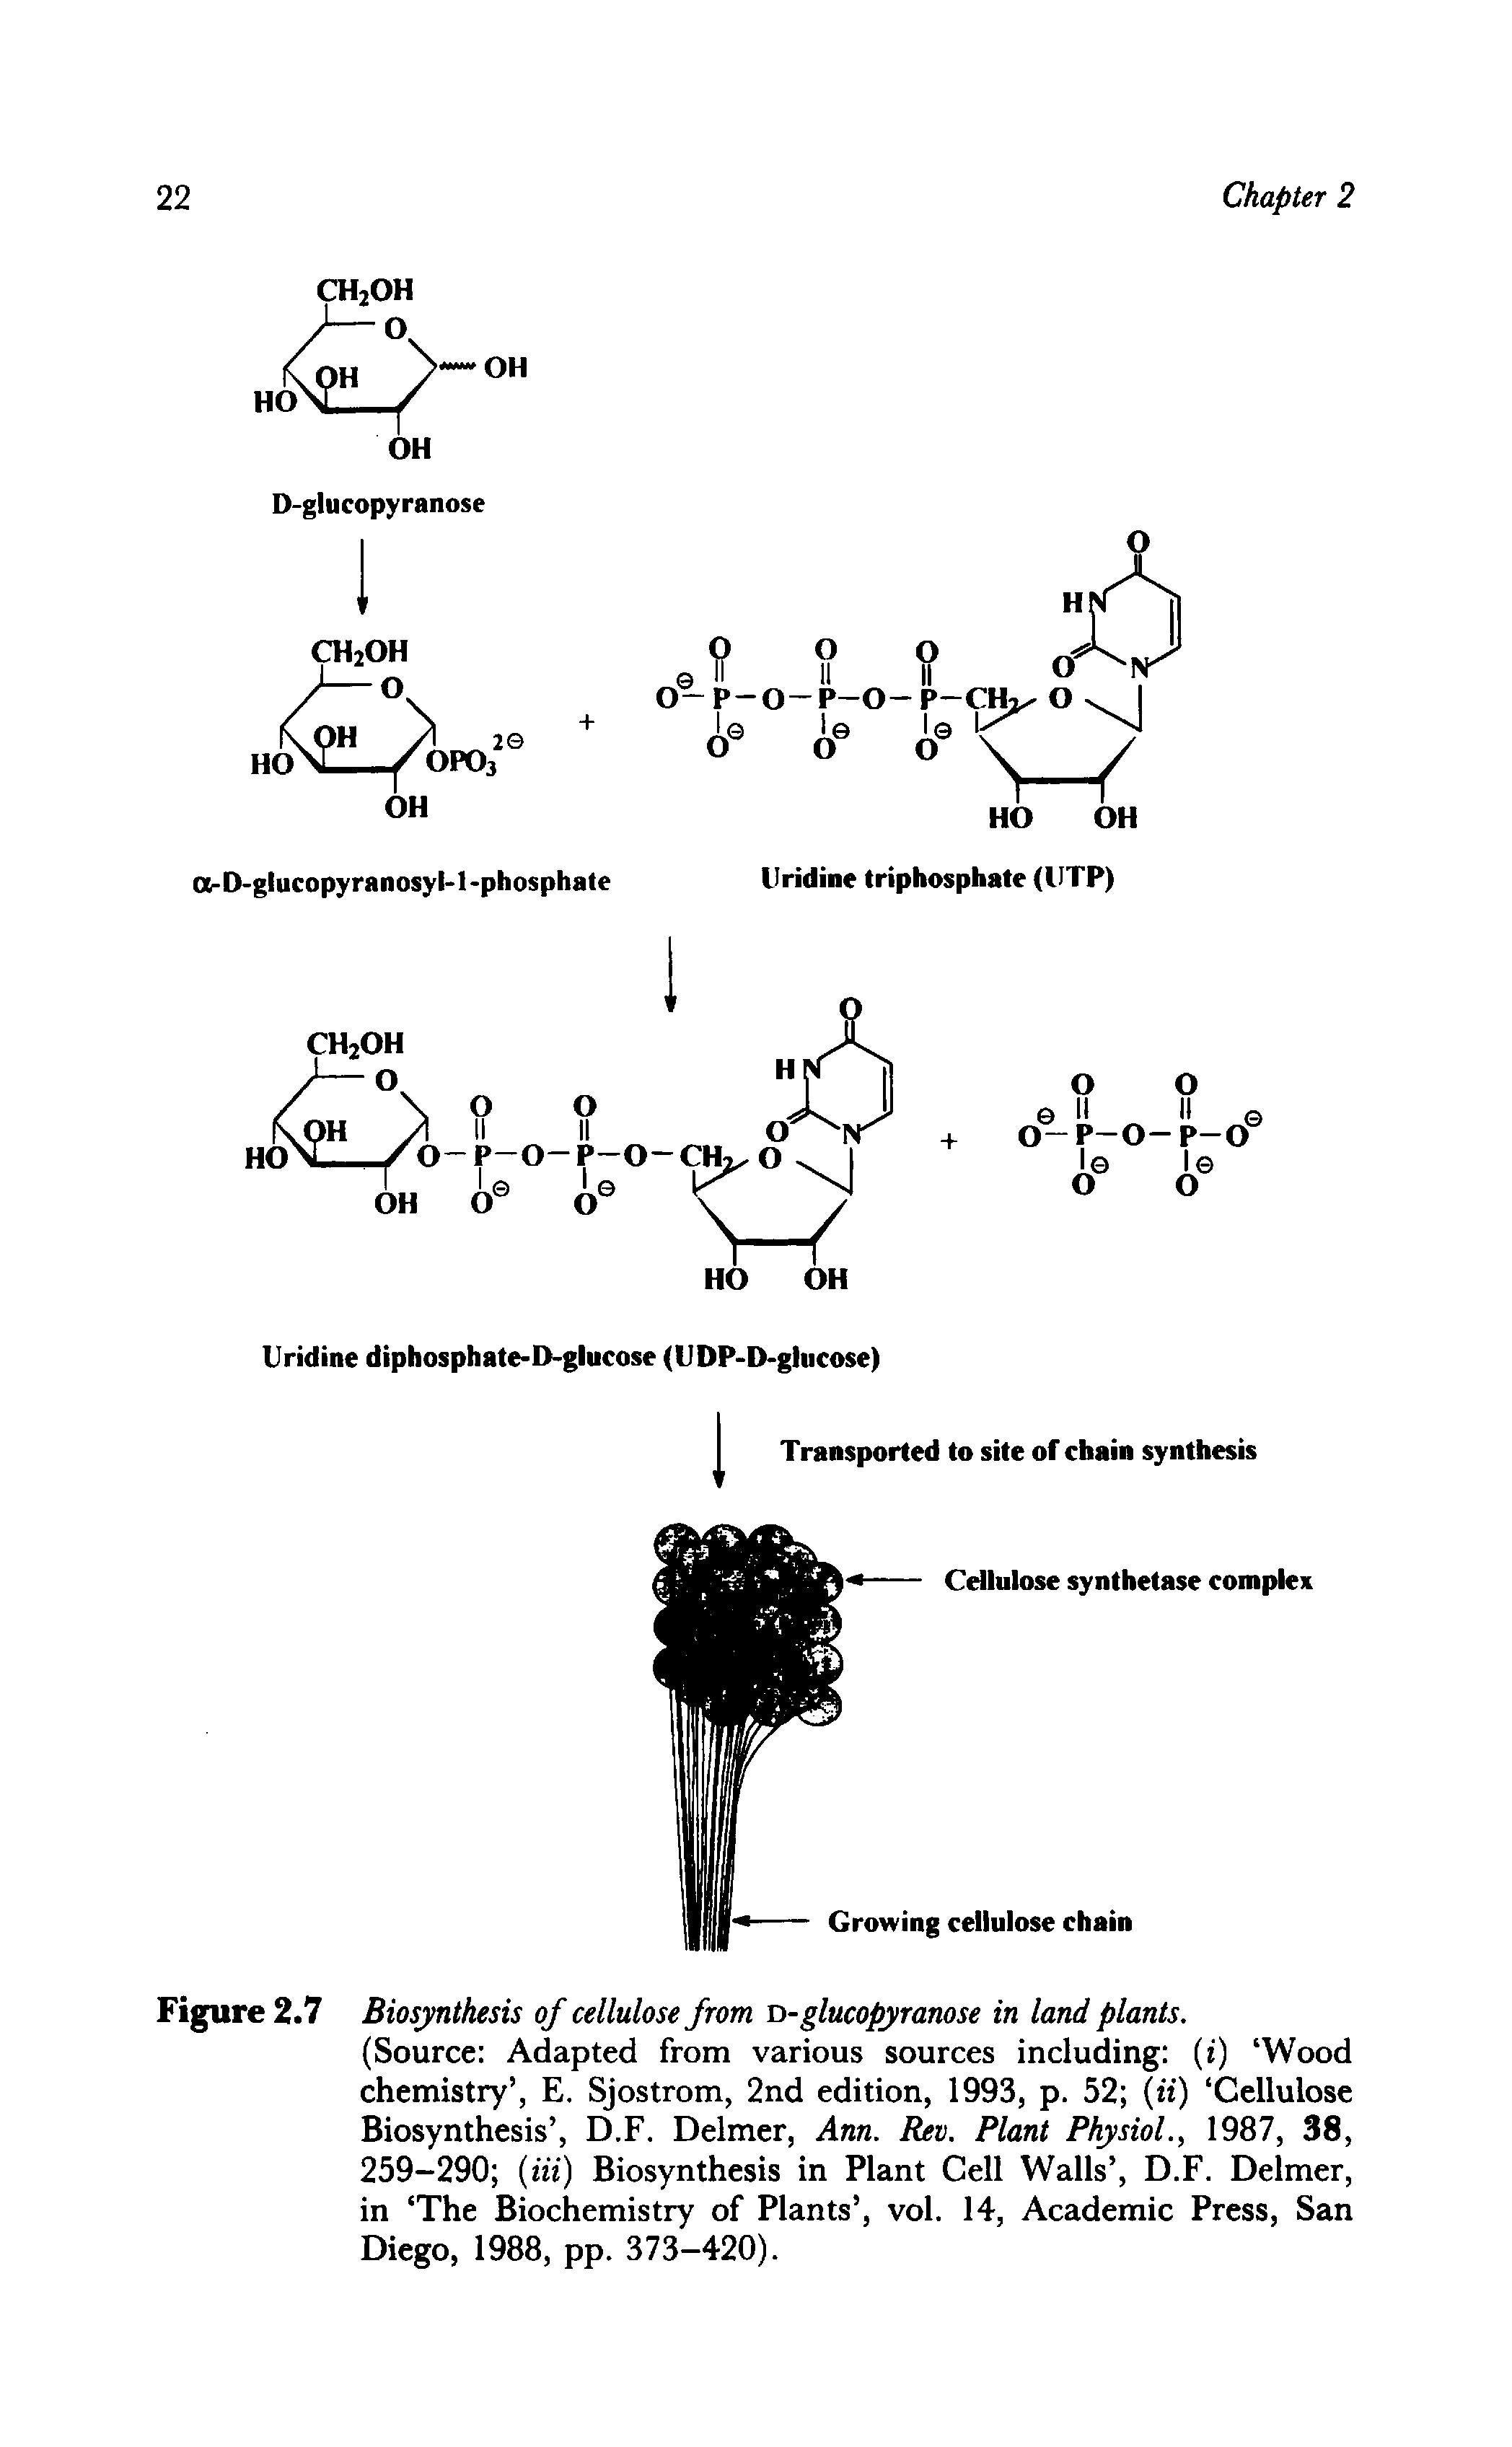 Figure 2.7 Biosynthesis of cellulose from D-glucopyranose in land plants.